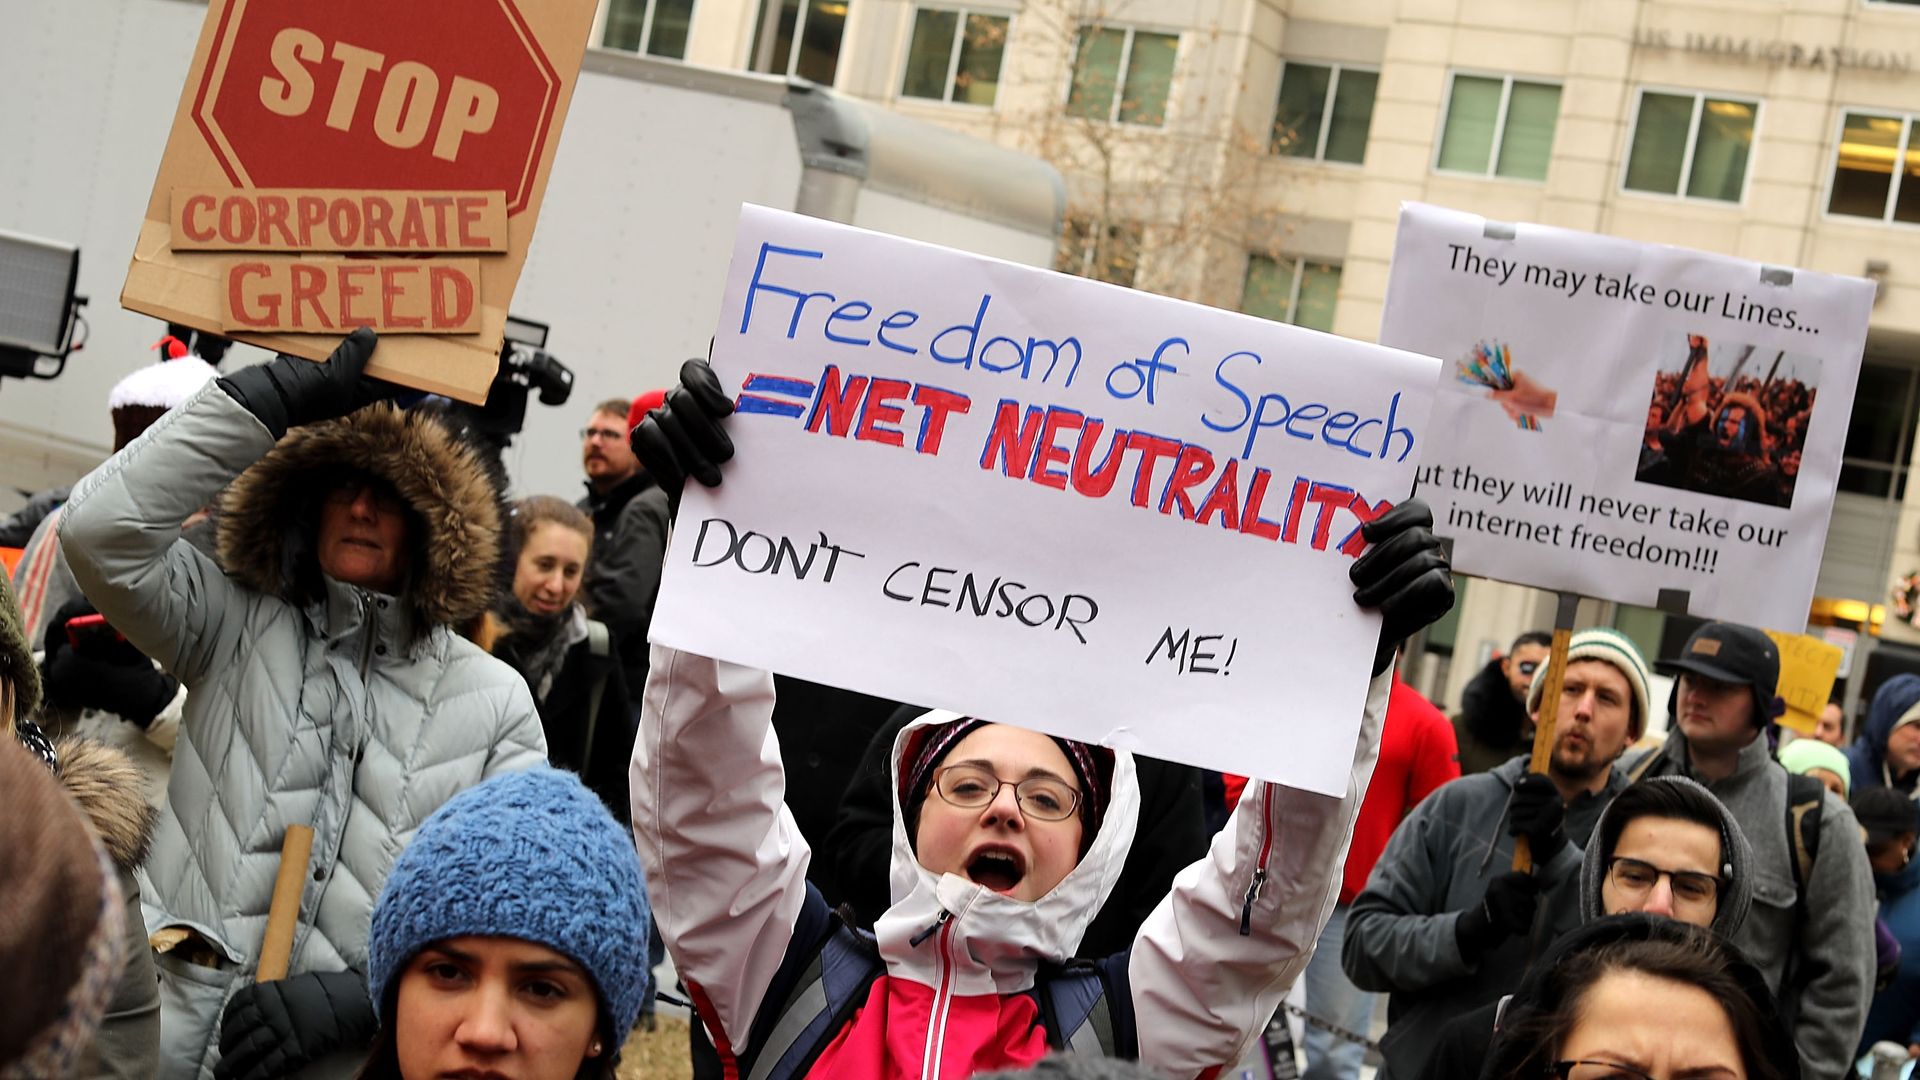 Protestors hold signs demonstrating against the end of net neutrality rules